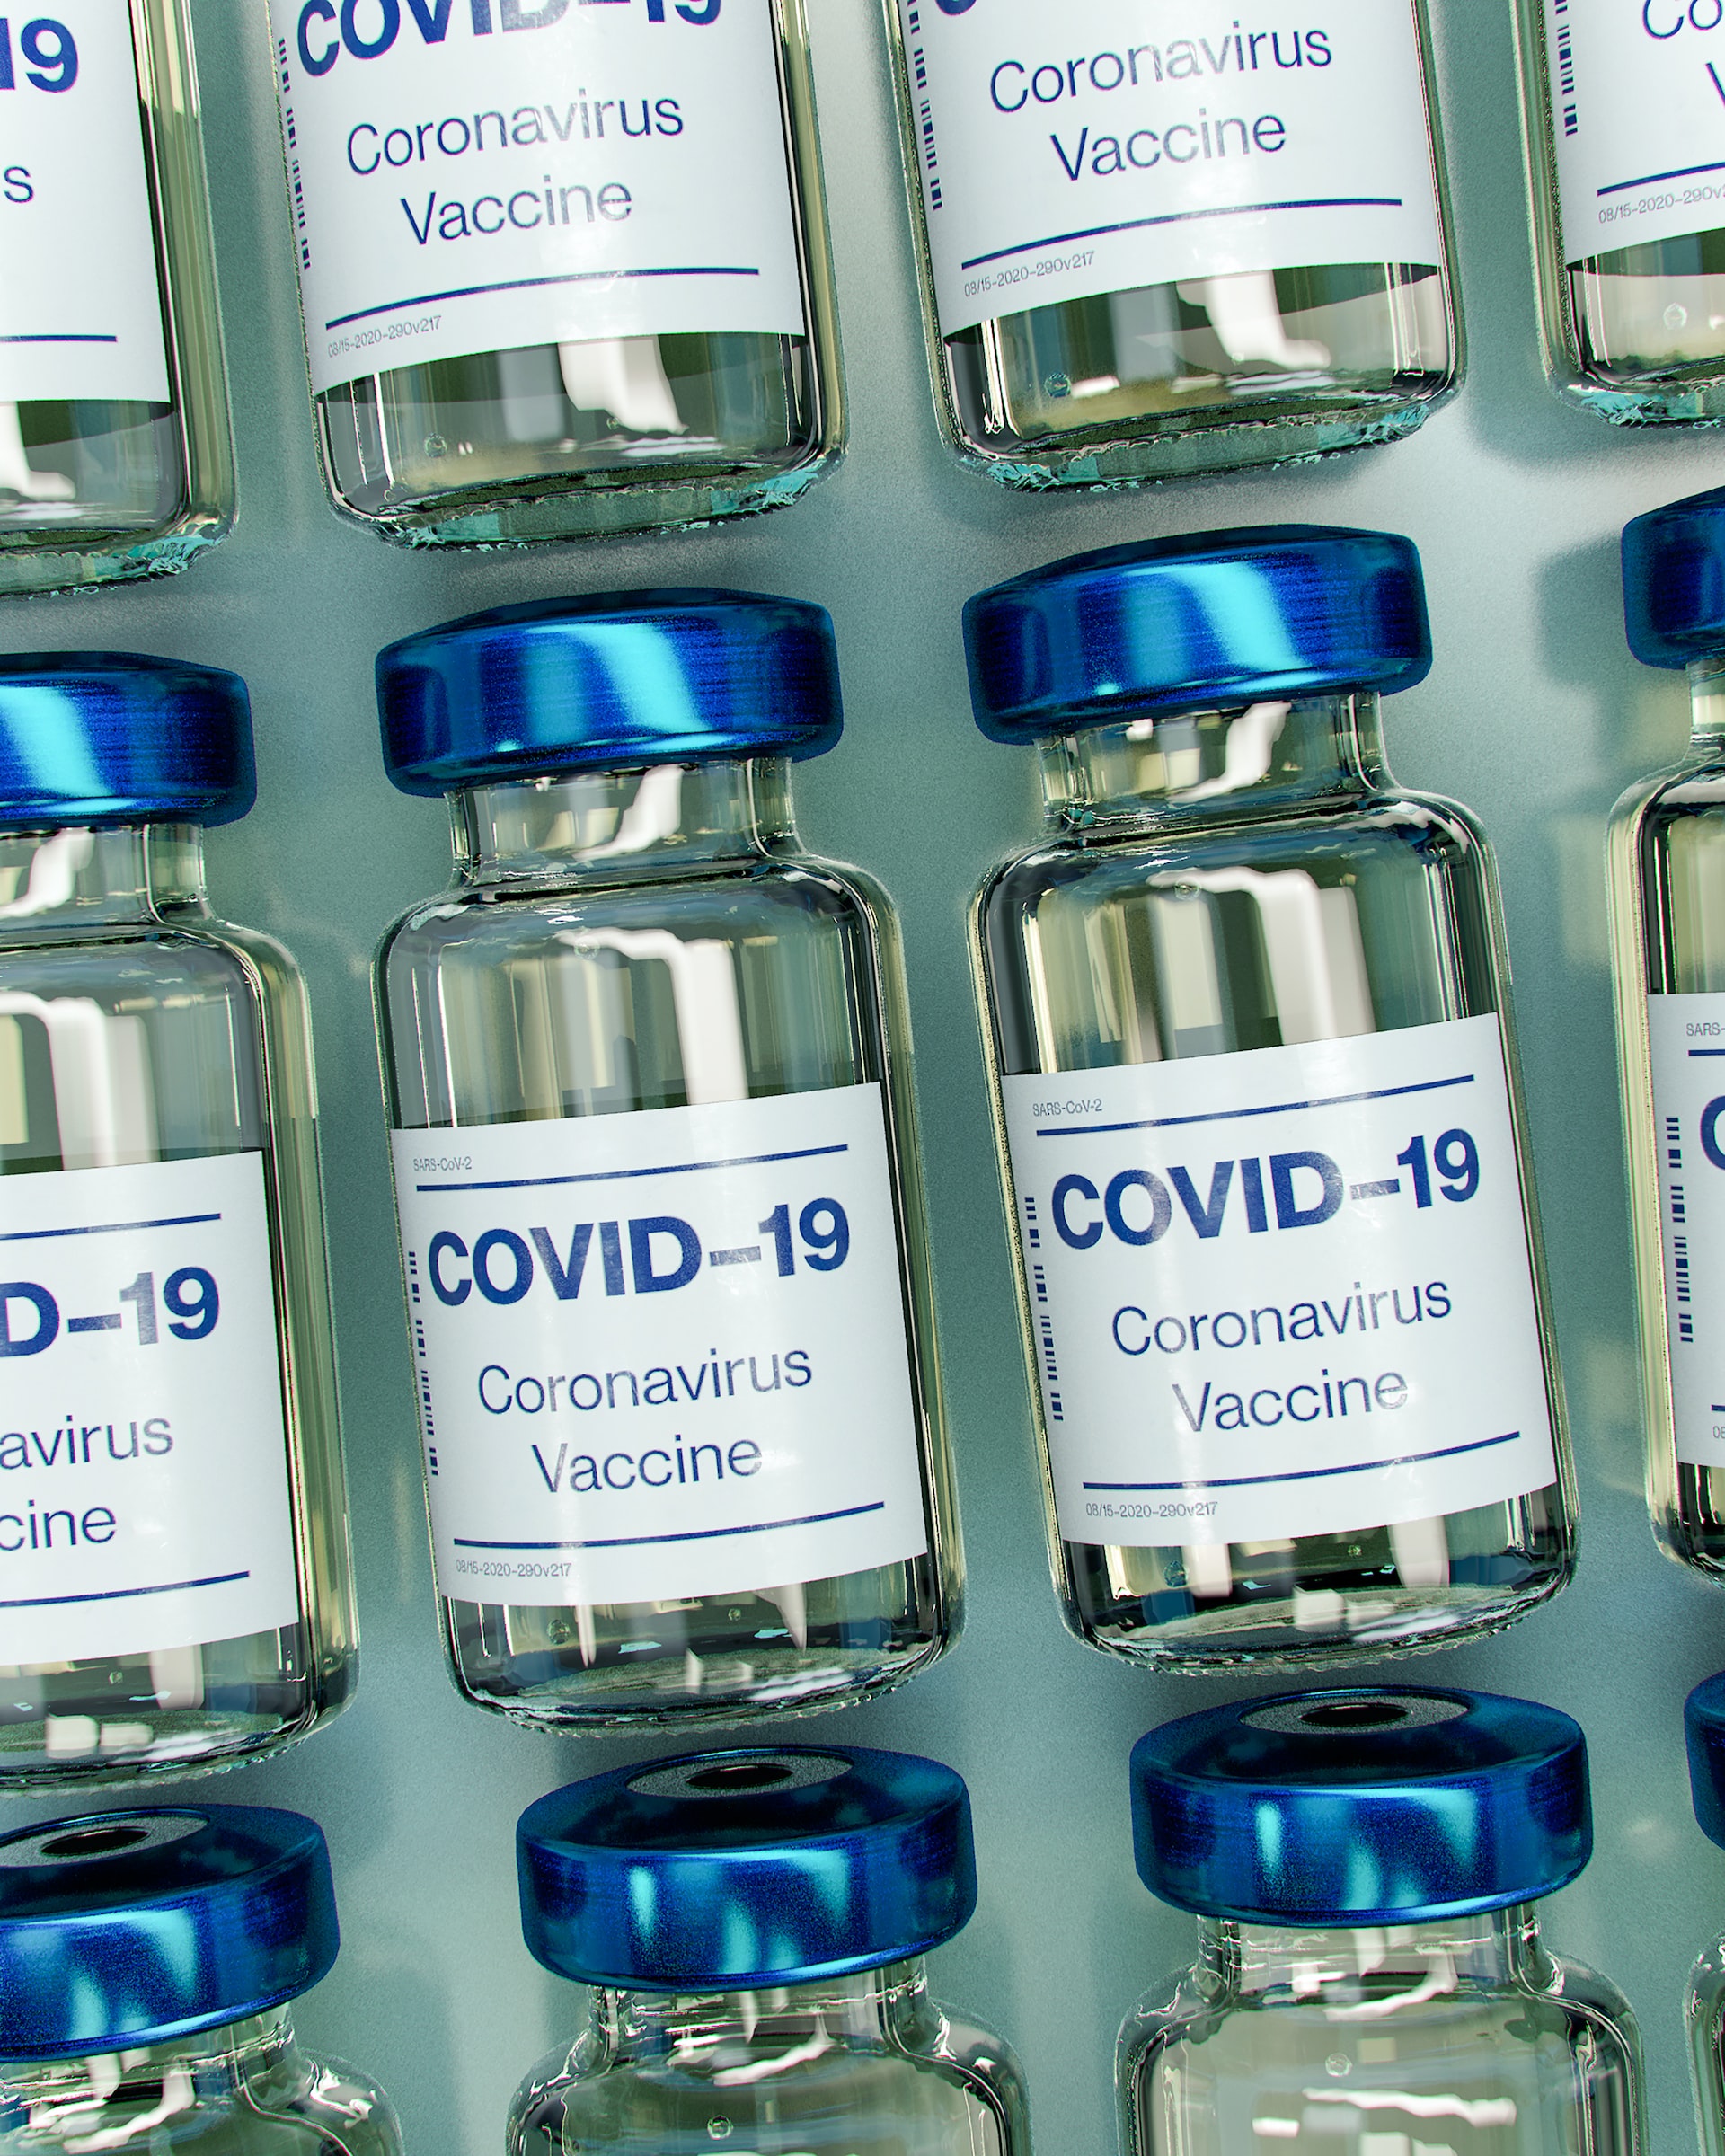 Covid-19 pandemic vaccinations